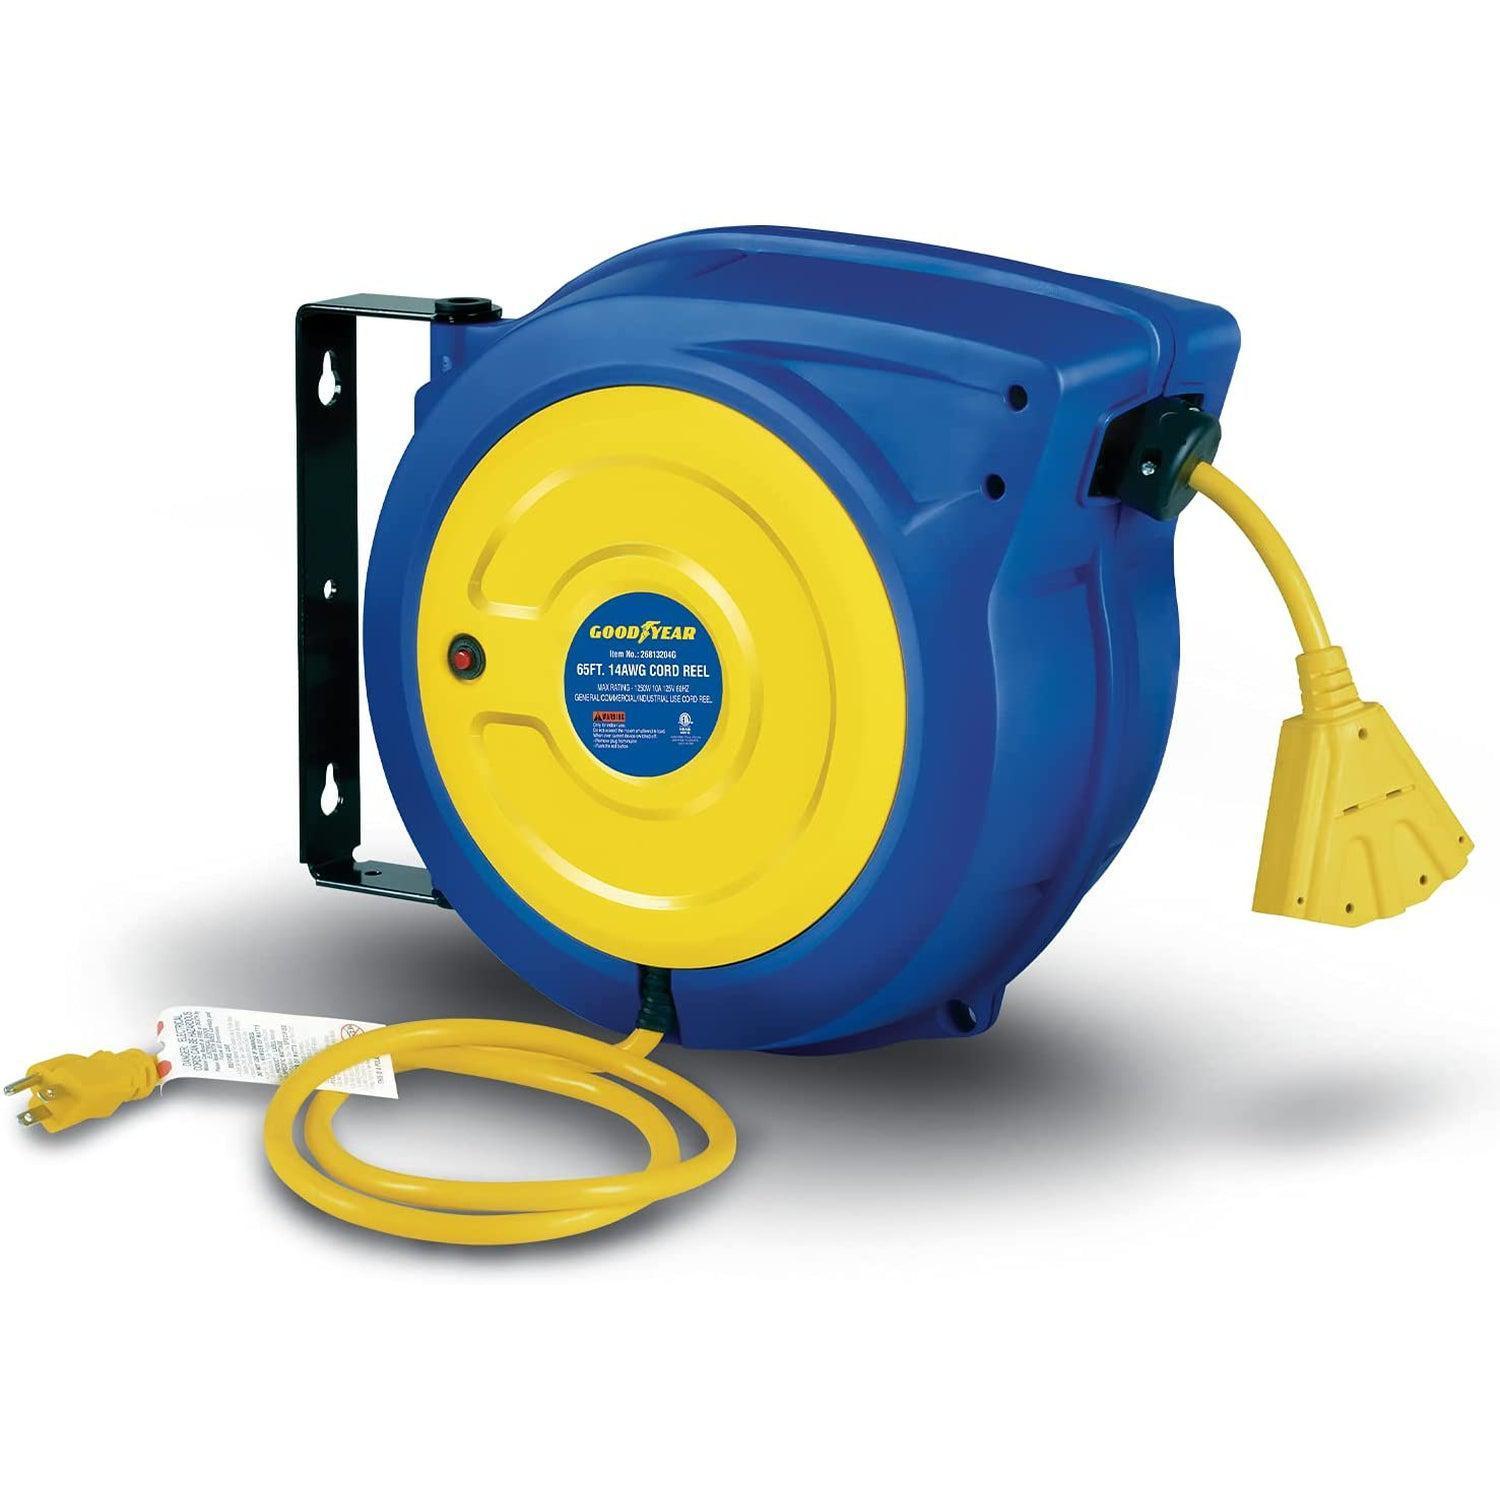 USW Extension Cord Wrap with AC Outlets